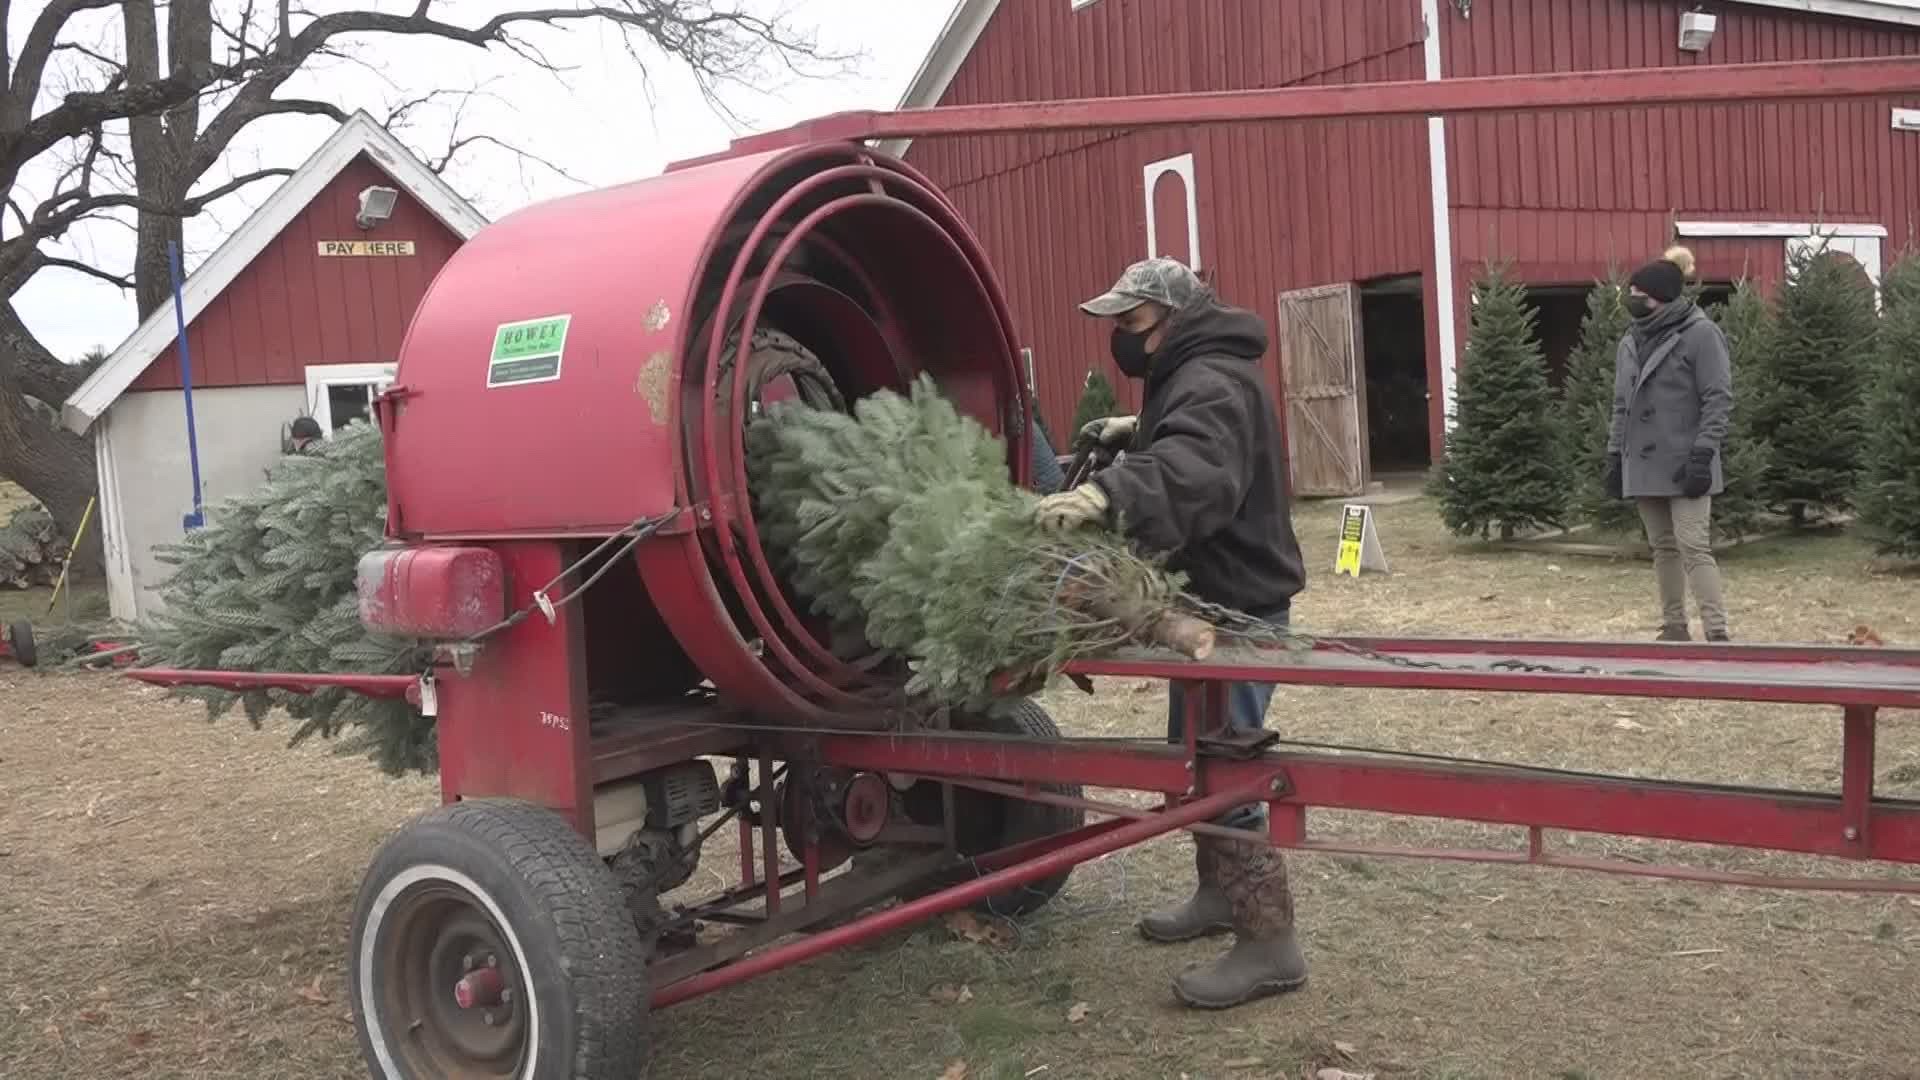 Just last week, many of West Michigan's Christmas tree farms opened for the holiday season. Some of them have already sold out.